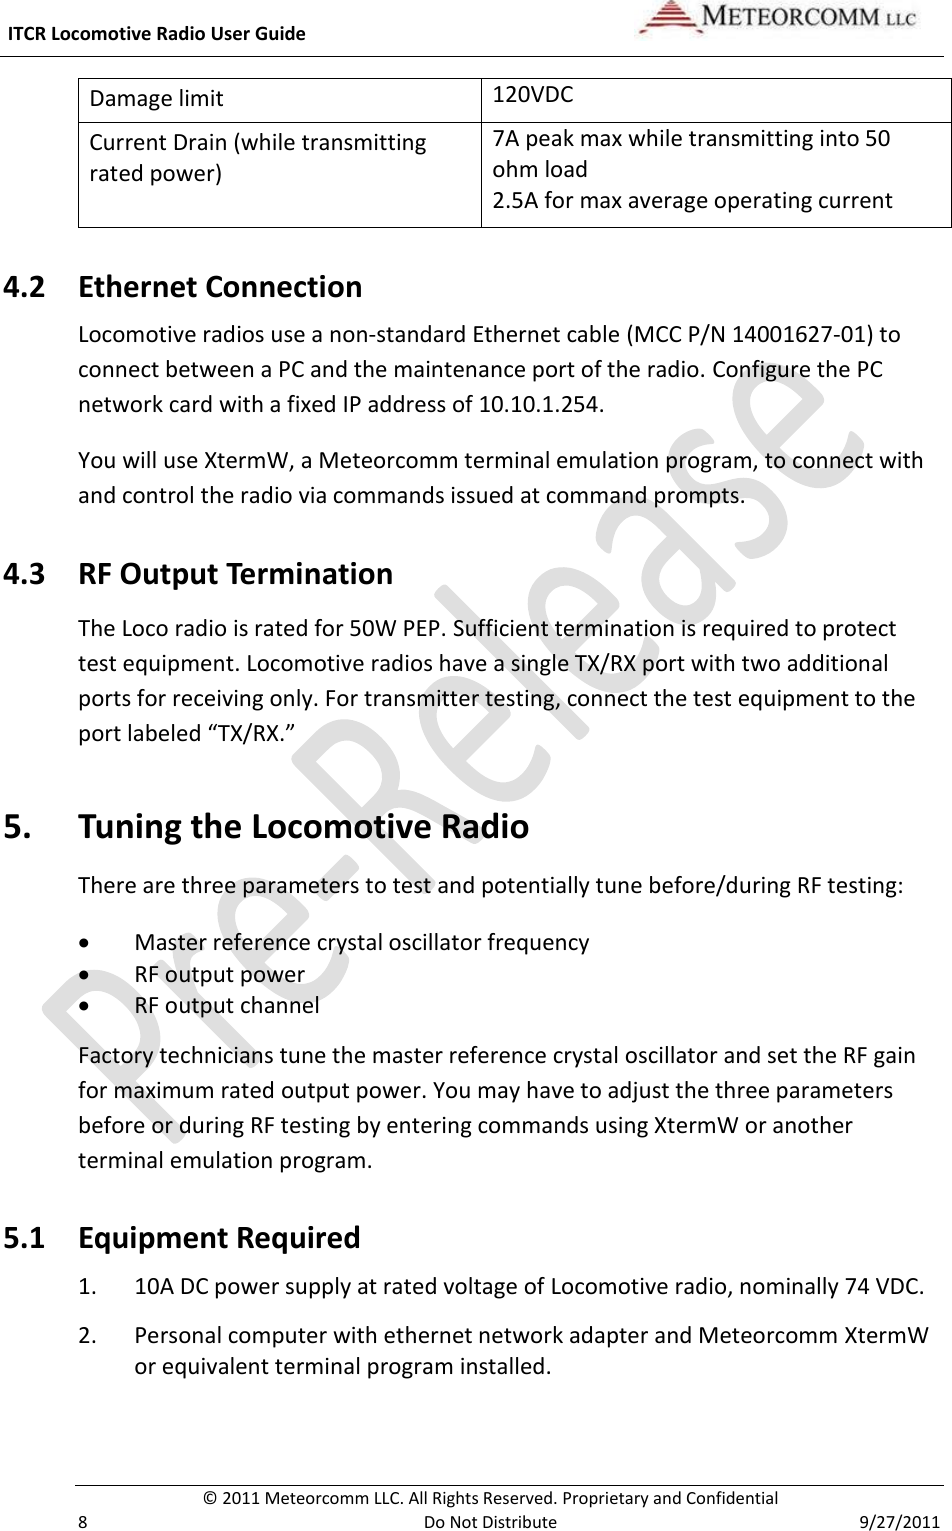  ITCR Locomotive Radio User Guide     © 2011 Meteorcomm LLC. All Rights Reserved. Proprietary and Confidential   8  Do Not Distribute  9/27/2011 Damage limit 120VDC Current Drain (while transmitting rated power) 7A peak max while transmitting into 50 ohm load  2.5A for max average operating current 4.2 Ethernet Connection Locomotive radios use a non-standard Ethernet cable (MCC P/N 14001627-01) to connect between a PC and the maintenance port of the radio. Configure the PC network card with a fixed IP address of 10.10.1.254.  You will use XtermW, a Meteorcomm terminal emulation program, to connect with and control the radio via commands issued at command prompts.  4.3 RF Output Termination The Loco radio is rated for 50W PEP. Sufficient termination is required to protect test equipment. Locomotive radios have a single TX/RX port with two additional ports for receiving only. For transmitter testing, connect the test equipment to the port labeled “TX/RX.”  5. Tuning the Locomotive Radio There are three parameters to test and potentially tune before/during RF testing:  Master reference crystal oscillator frequency  RF output power  RF output channel Factory technicians tune the master reference crystal oscillator and set the RF gain for maximum rated output power. You may have to adjust the three parameters before or during RF testing by entering commands using XtermW or another terminal emulation program.  5.1 Equipment Required 1. 10A DC power supply at rated voltage of Locomotive radio, nominally 74 VDC. 2. Personal computer with ethernet network adapter and Meteorcomm XtermW or equivalent terminal program installed. 